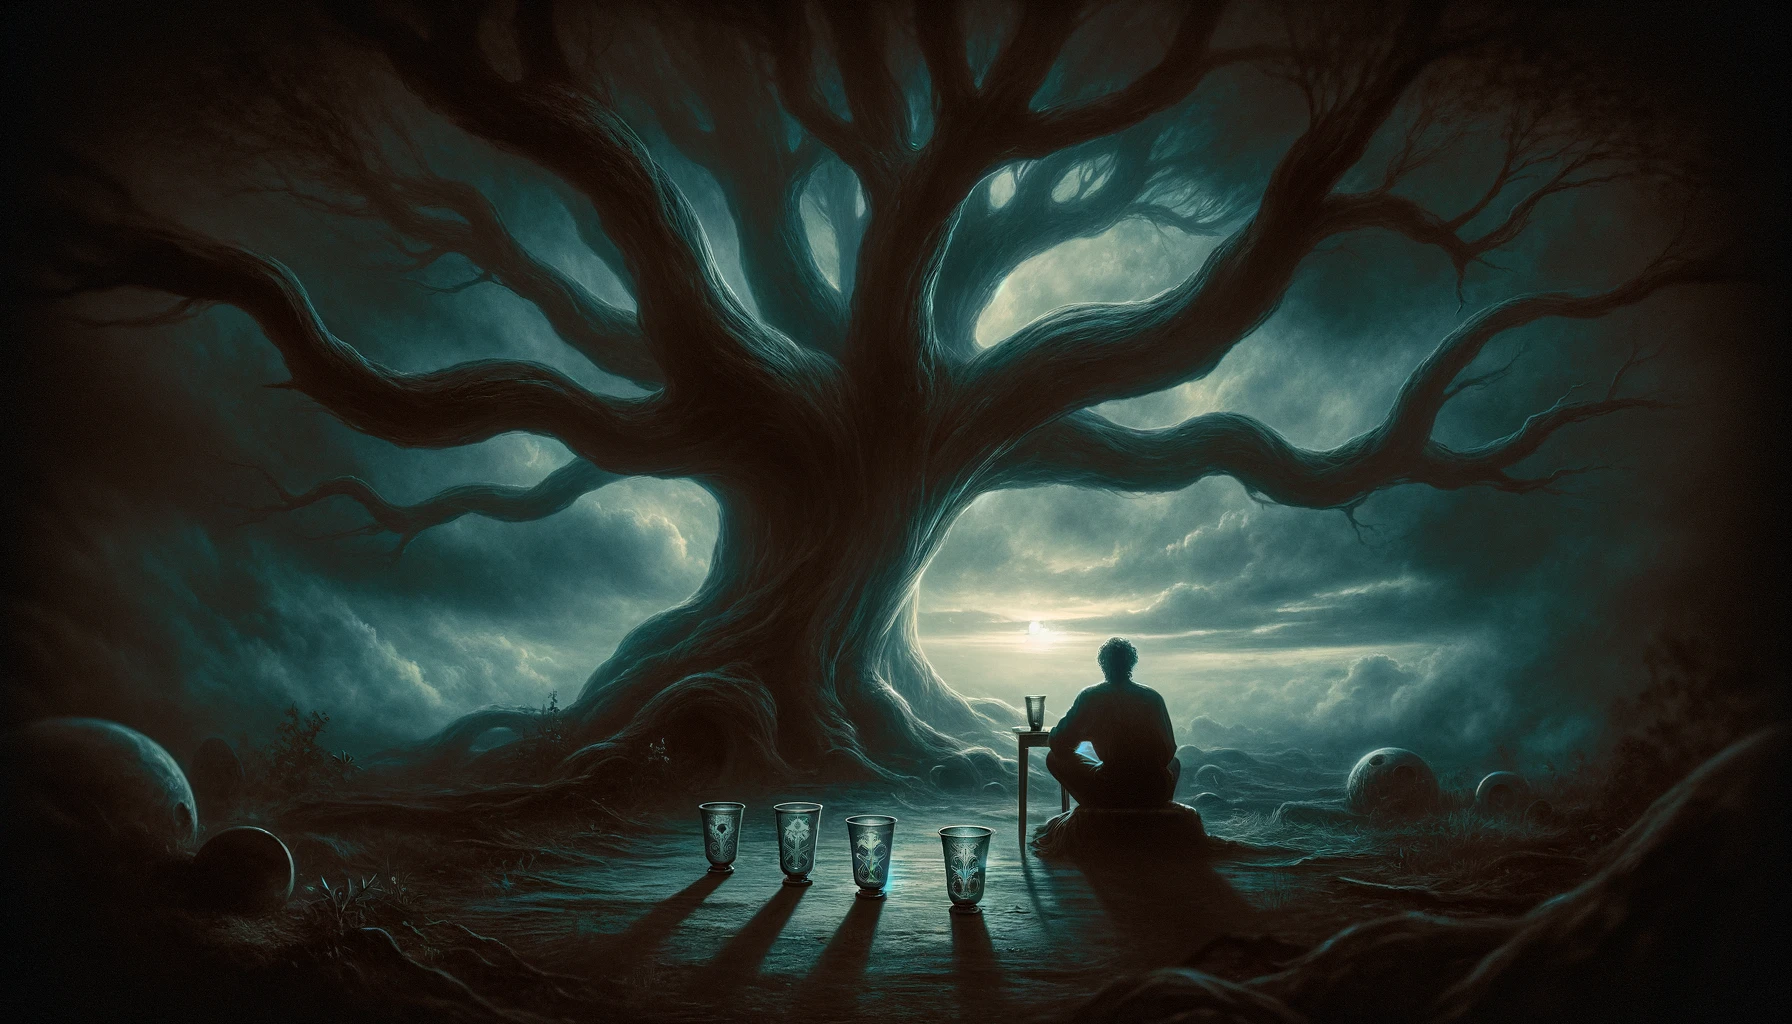 A dramatic representation of the Four of Cups tarot card A solitary contemplative figure sits under a large gnarled tree in a dimly lit moody sett